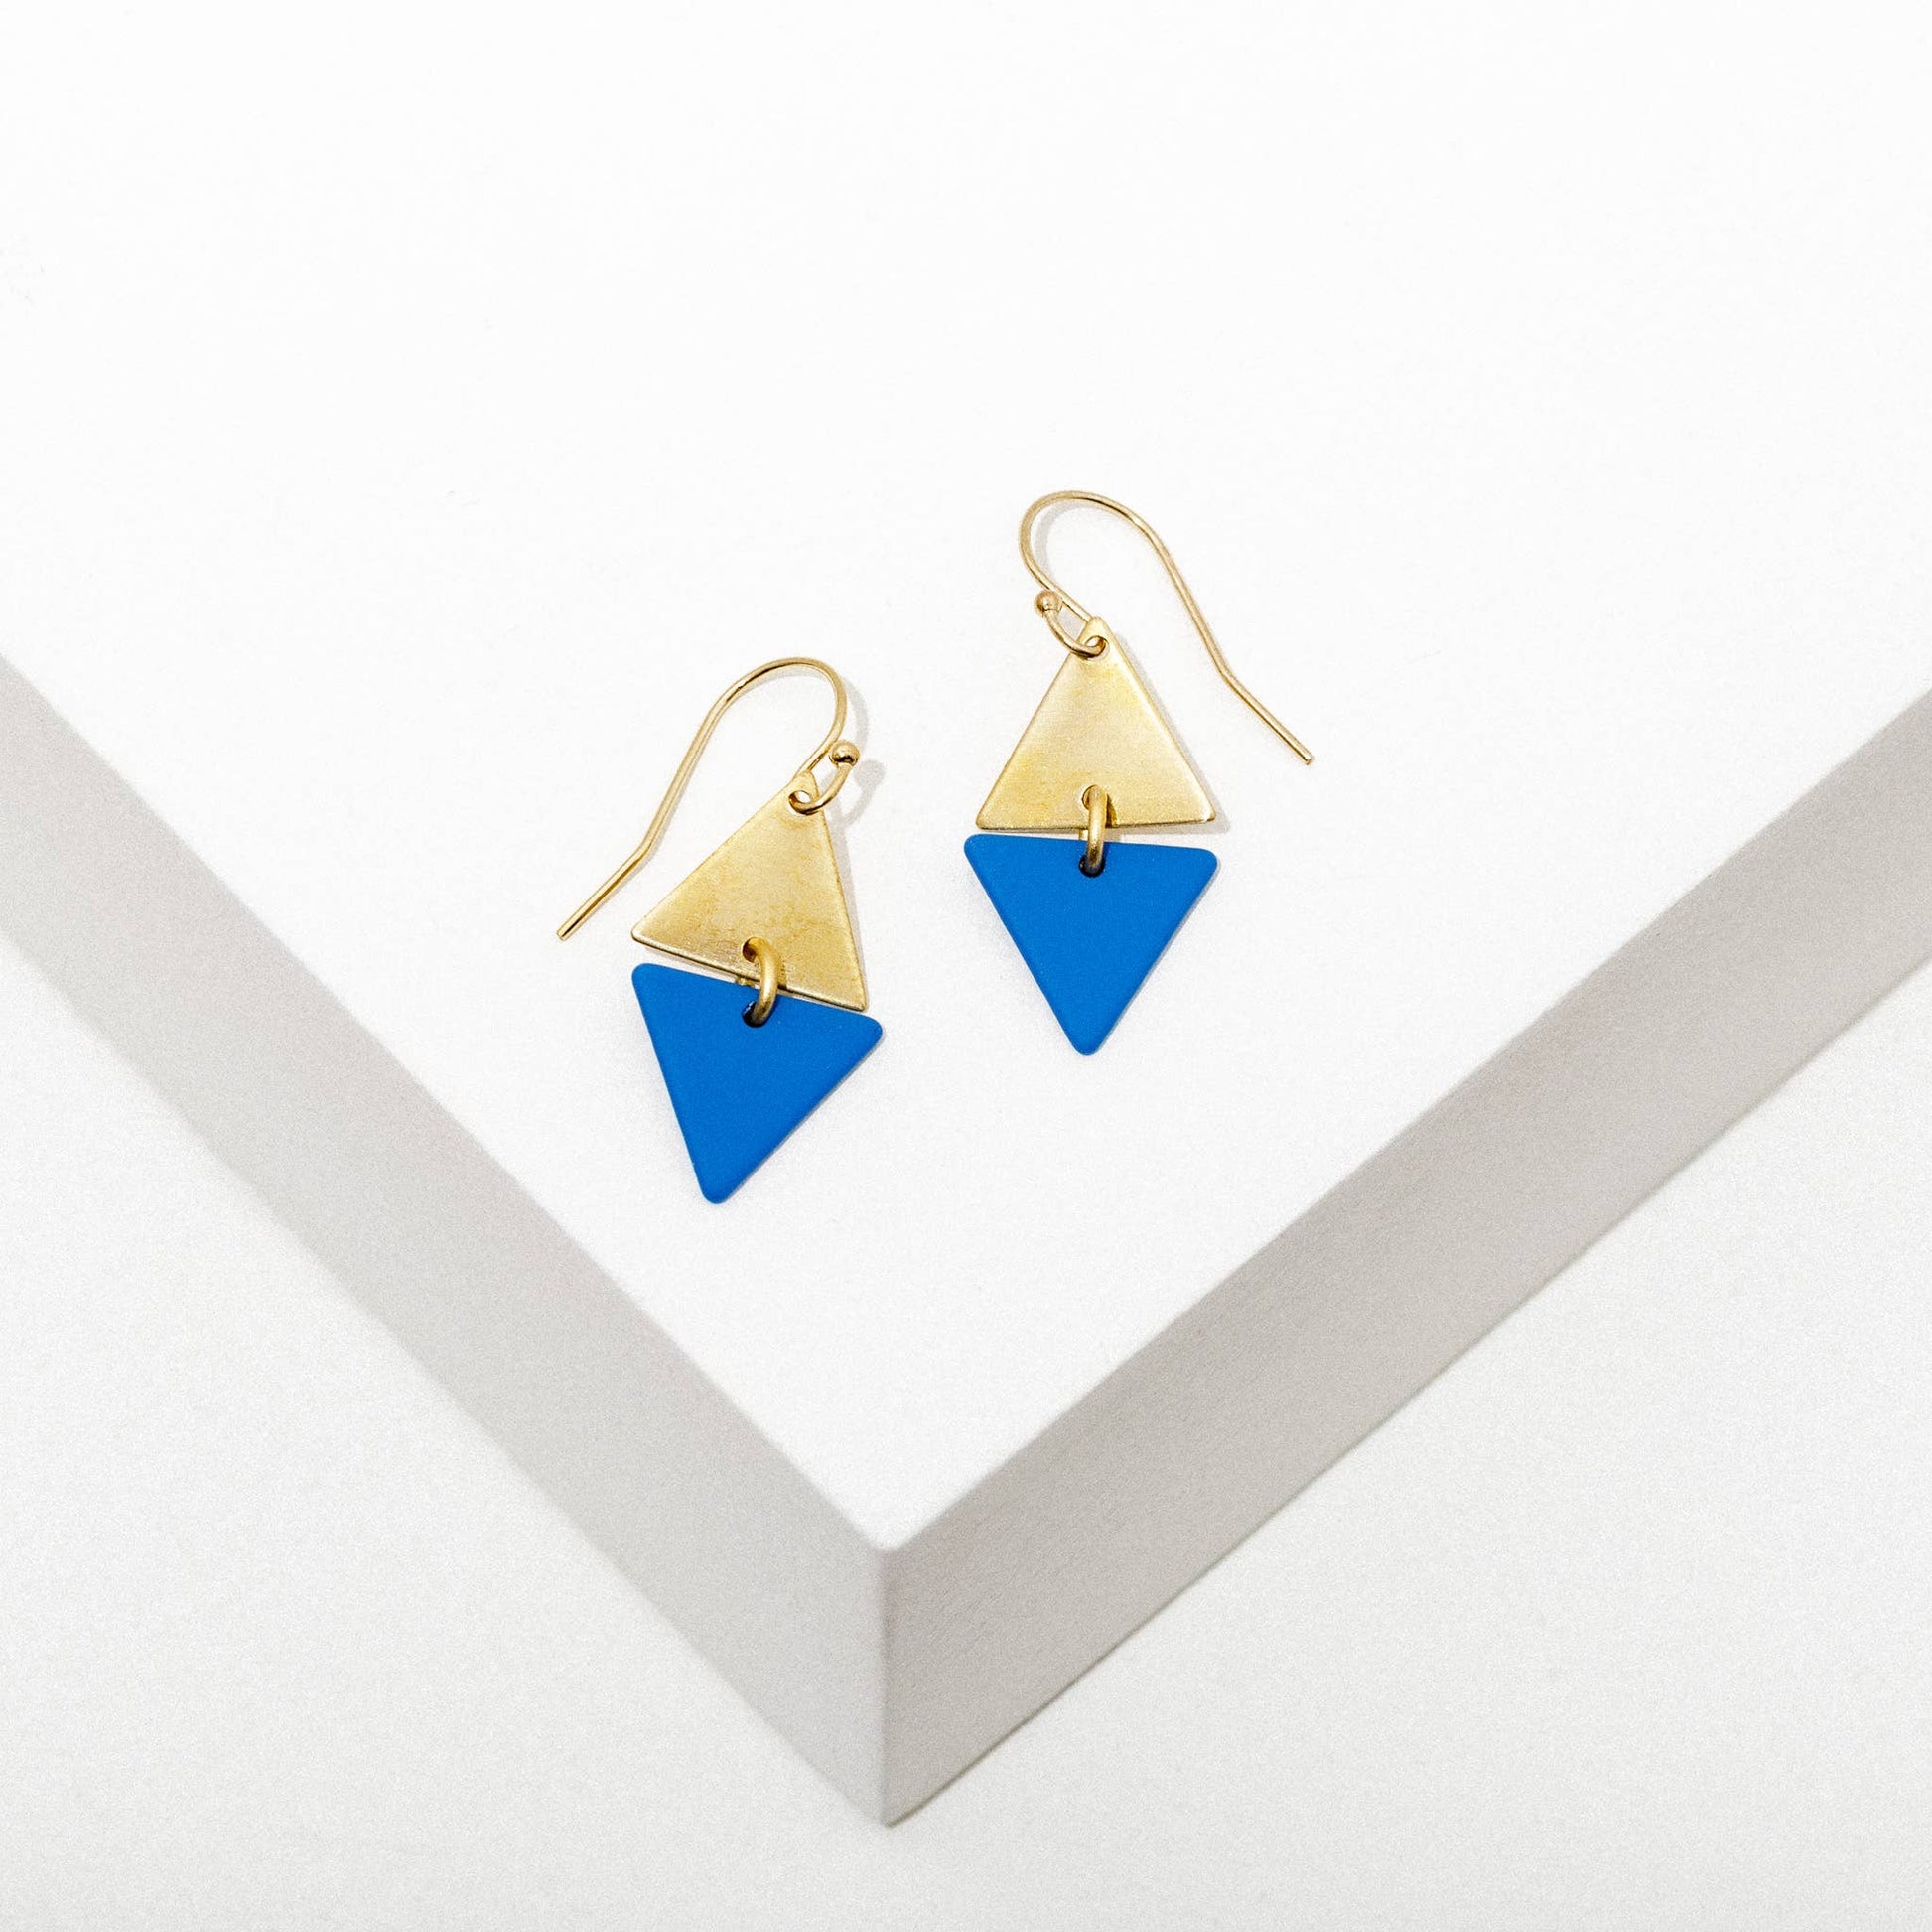 Larissa Loden - Alta Earrings  Larissa Loden Cobalt  -better made easy-eco-friendly-sustainable-gifting